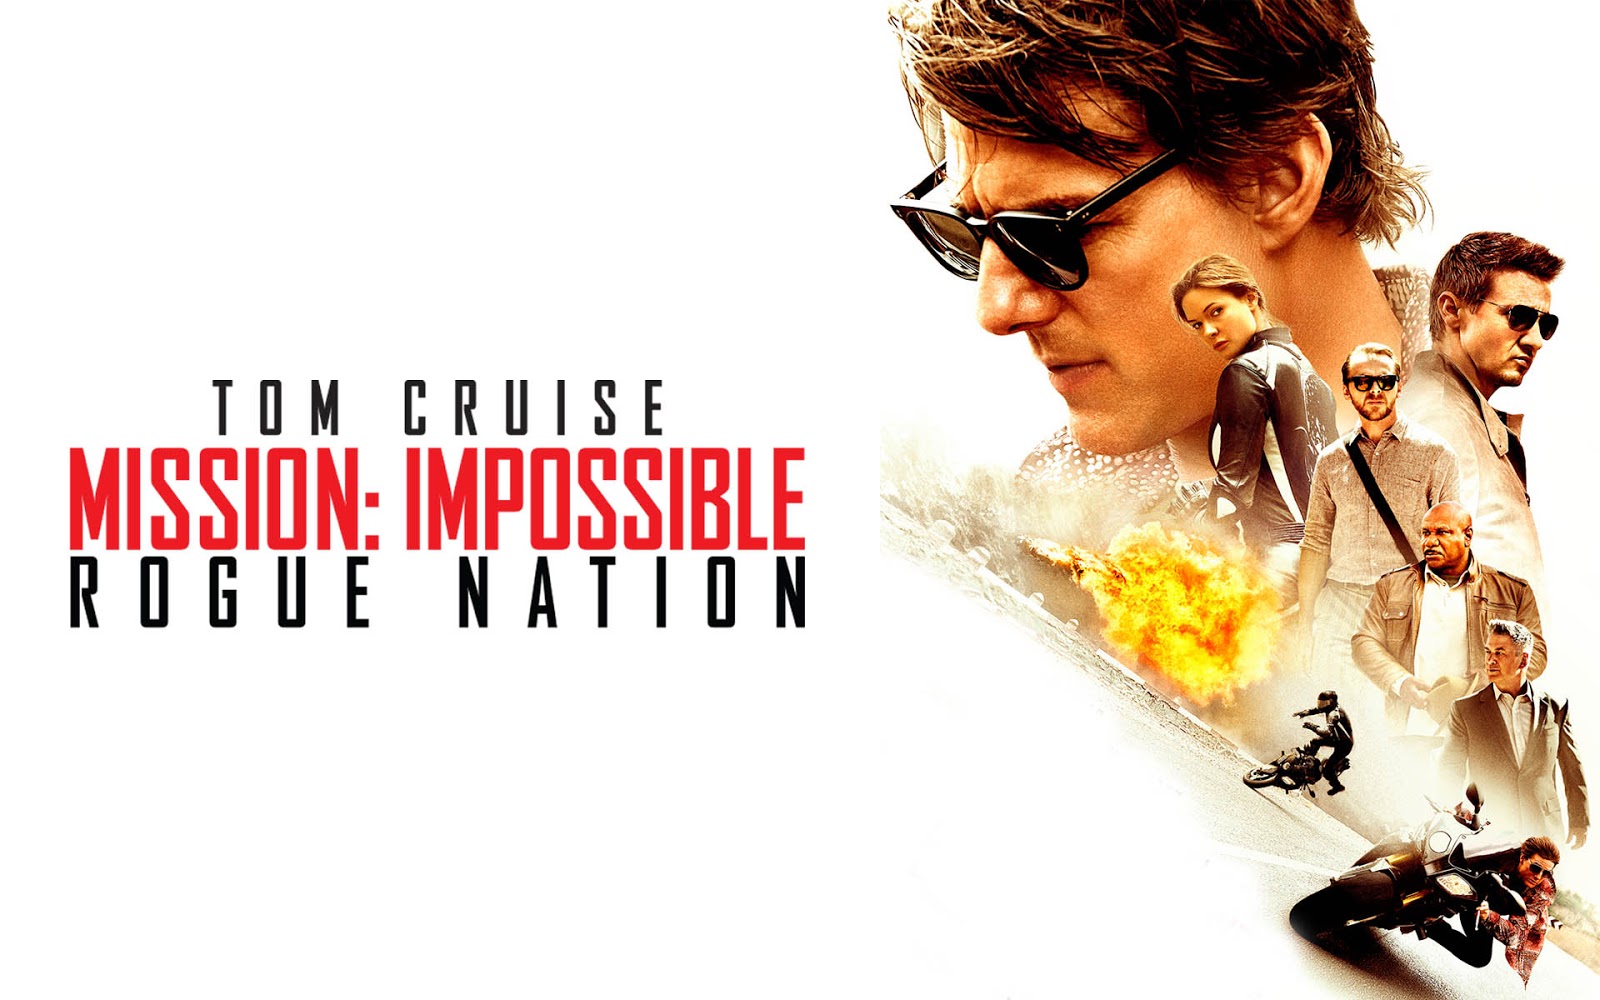 mission impossible 5 full movie watch online in hindi